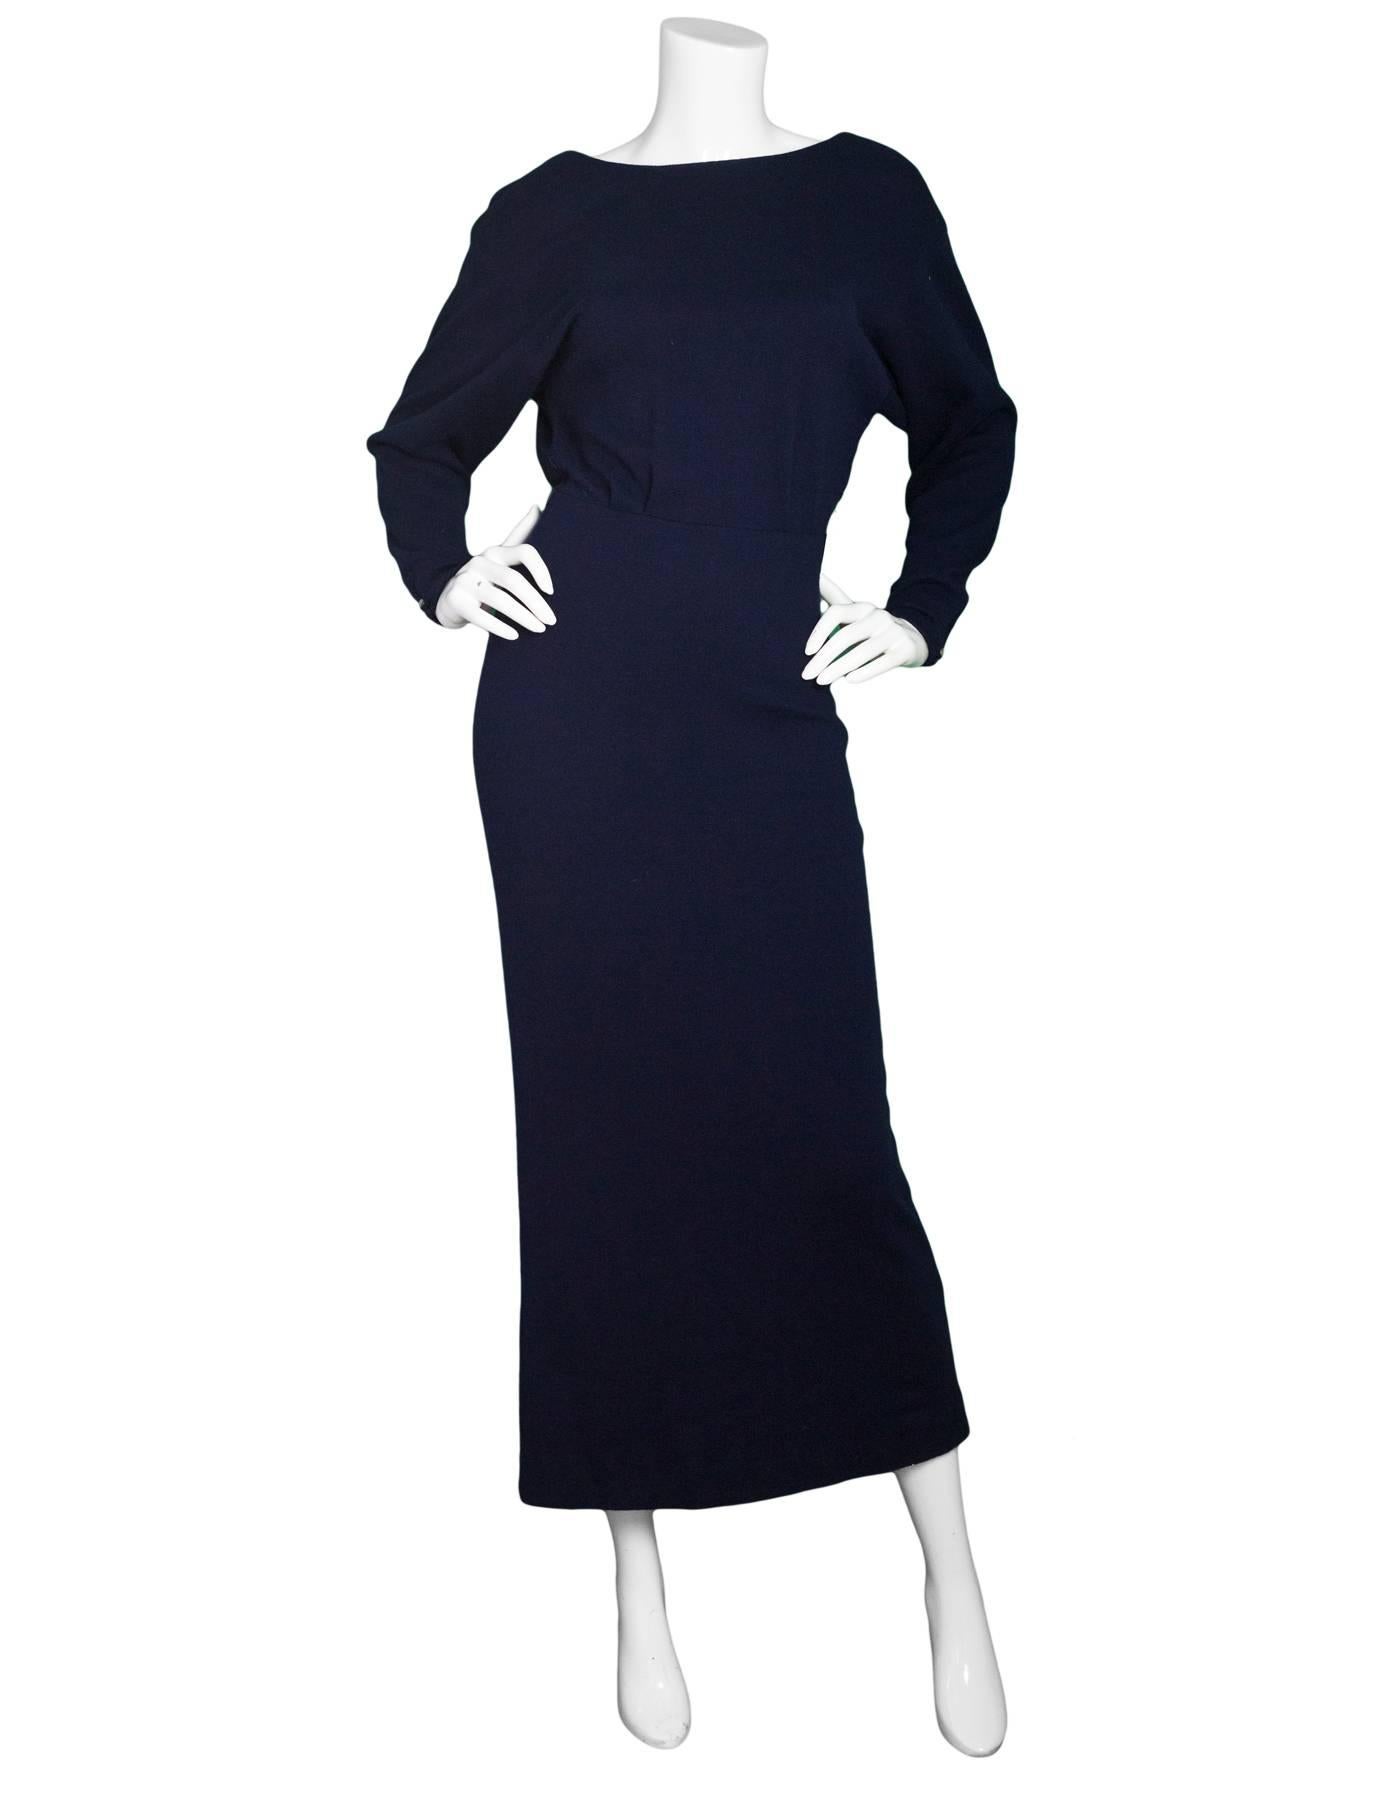 Ralph Lauren Navy Cashmere Dolman Sleeve Dress Sz 4

Features open back

Made In: USA
Color: Navy
Composition: 100% cashmere
Lining: None
Closure/Opening: Zip closure at back of skirt
Exterior Pockets: None
Interior Pockets: None
Overall Condition: